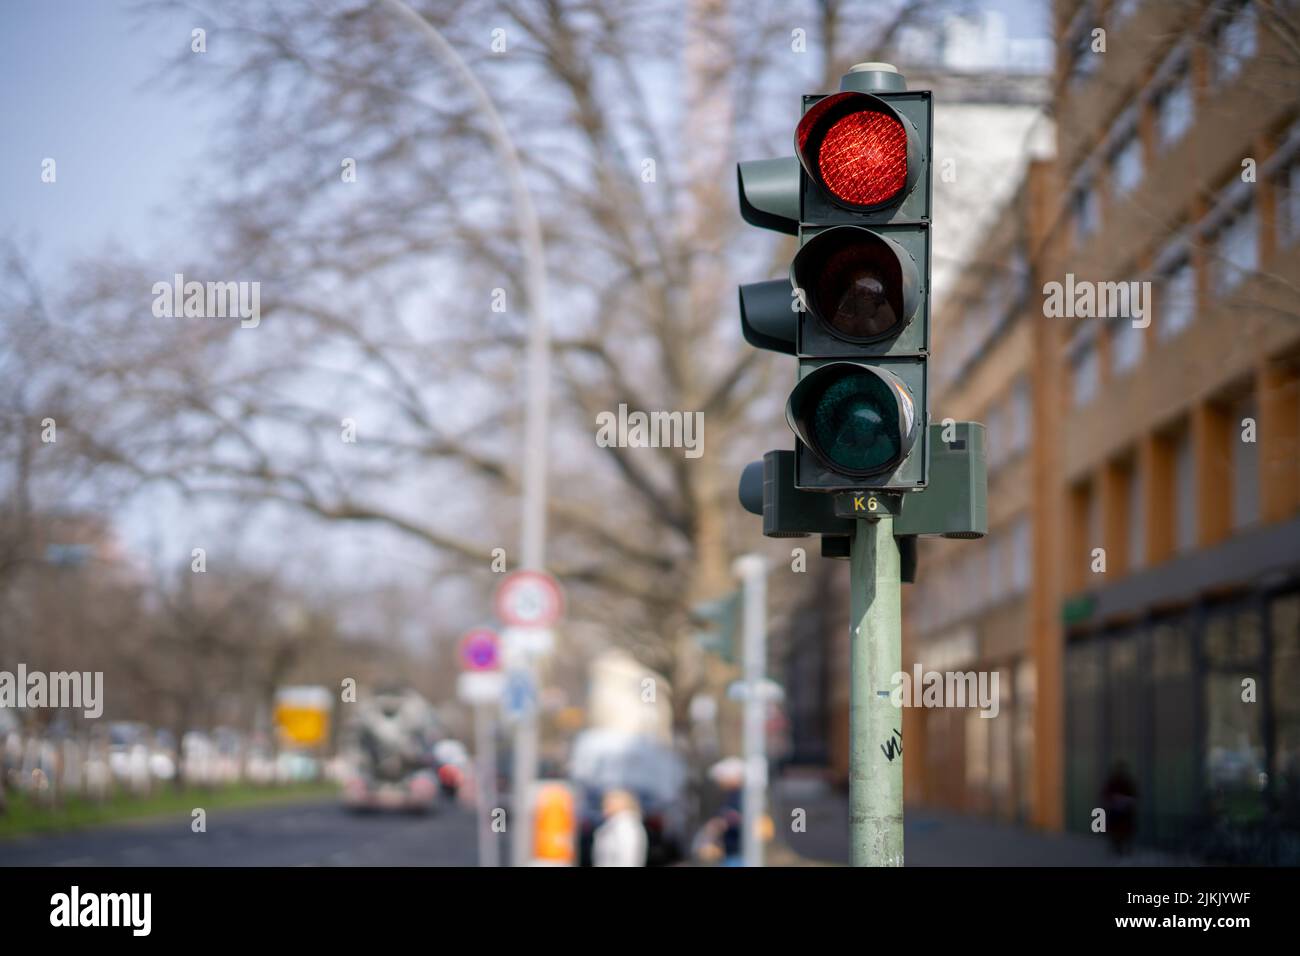 A photo of traffic lights in a city with the red lamp on Stock Photo